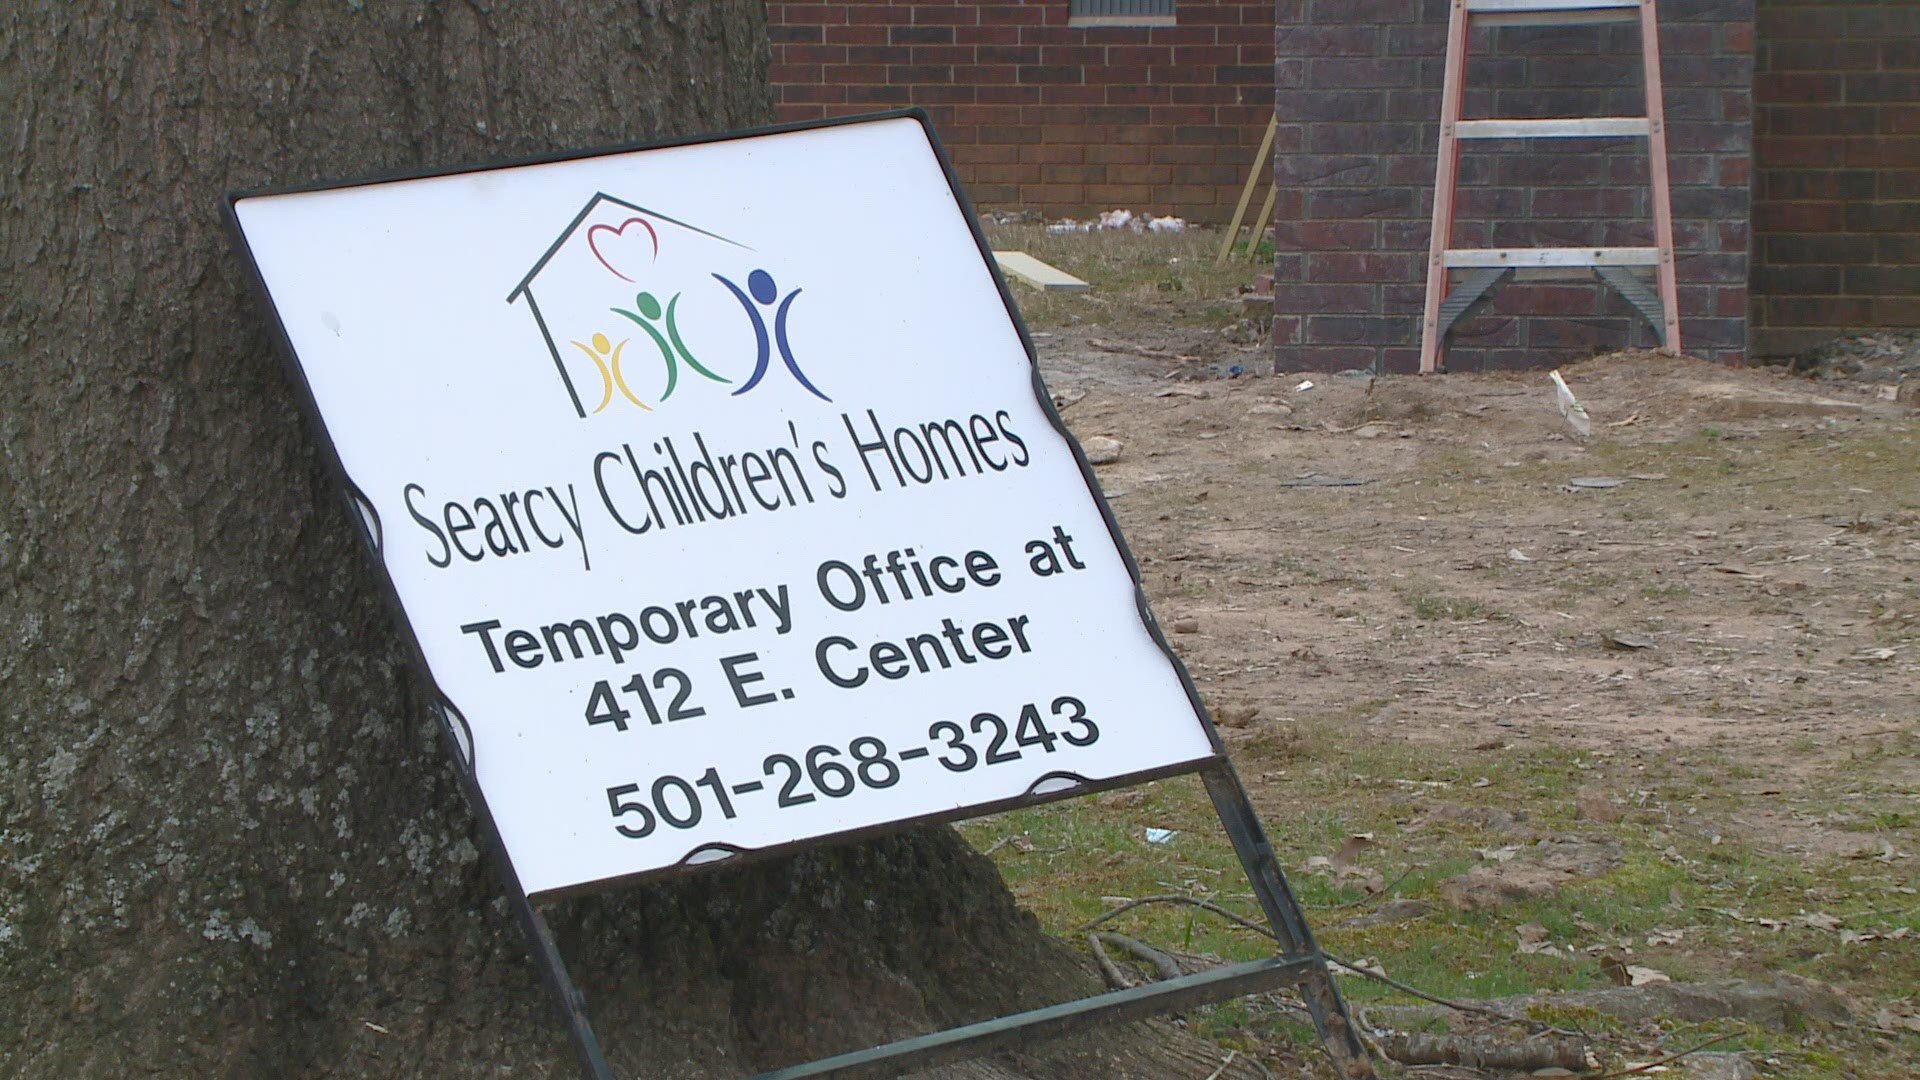 The organization is building a multi-purpose house in Searcy that will be a place for children to stay as an alternative to DHS offices, along with other practical spaces for new programs.